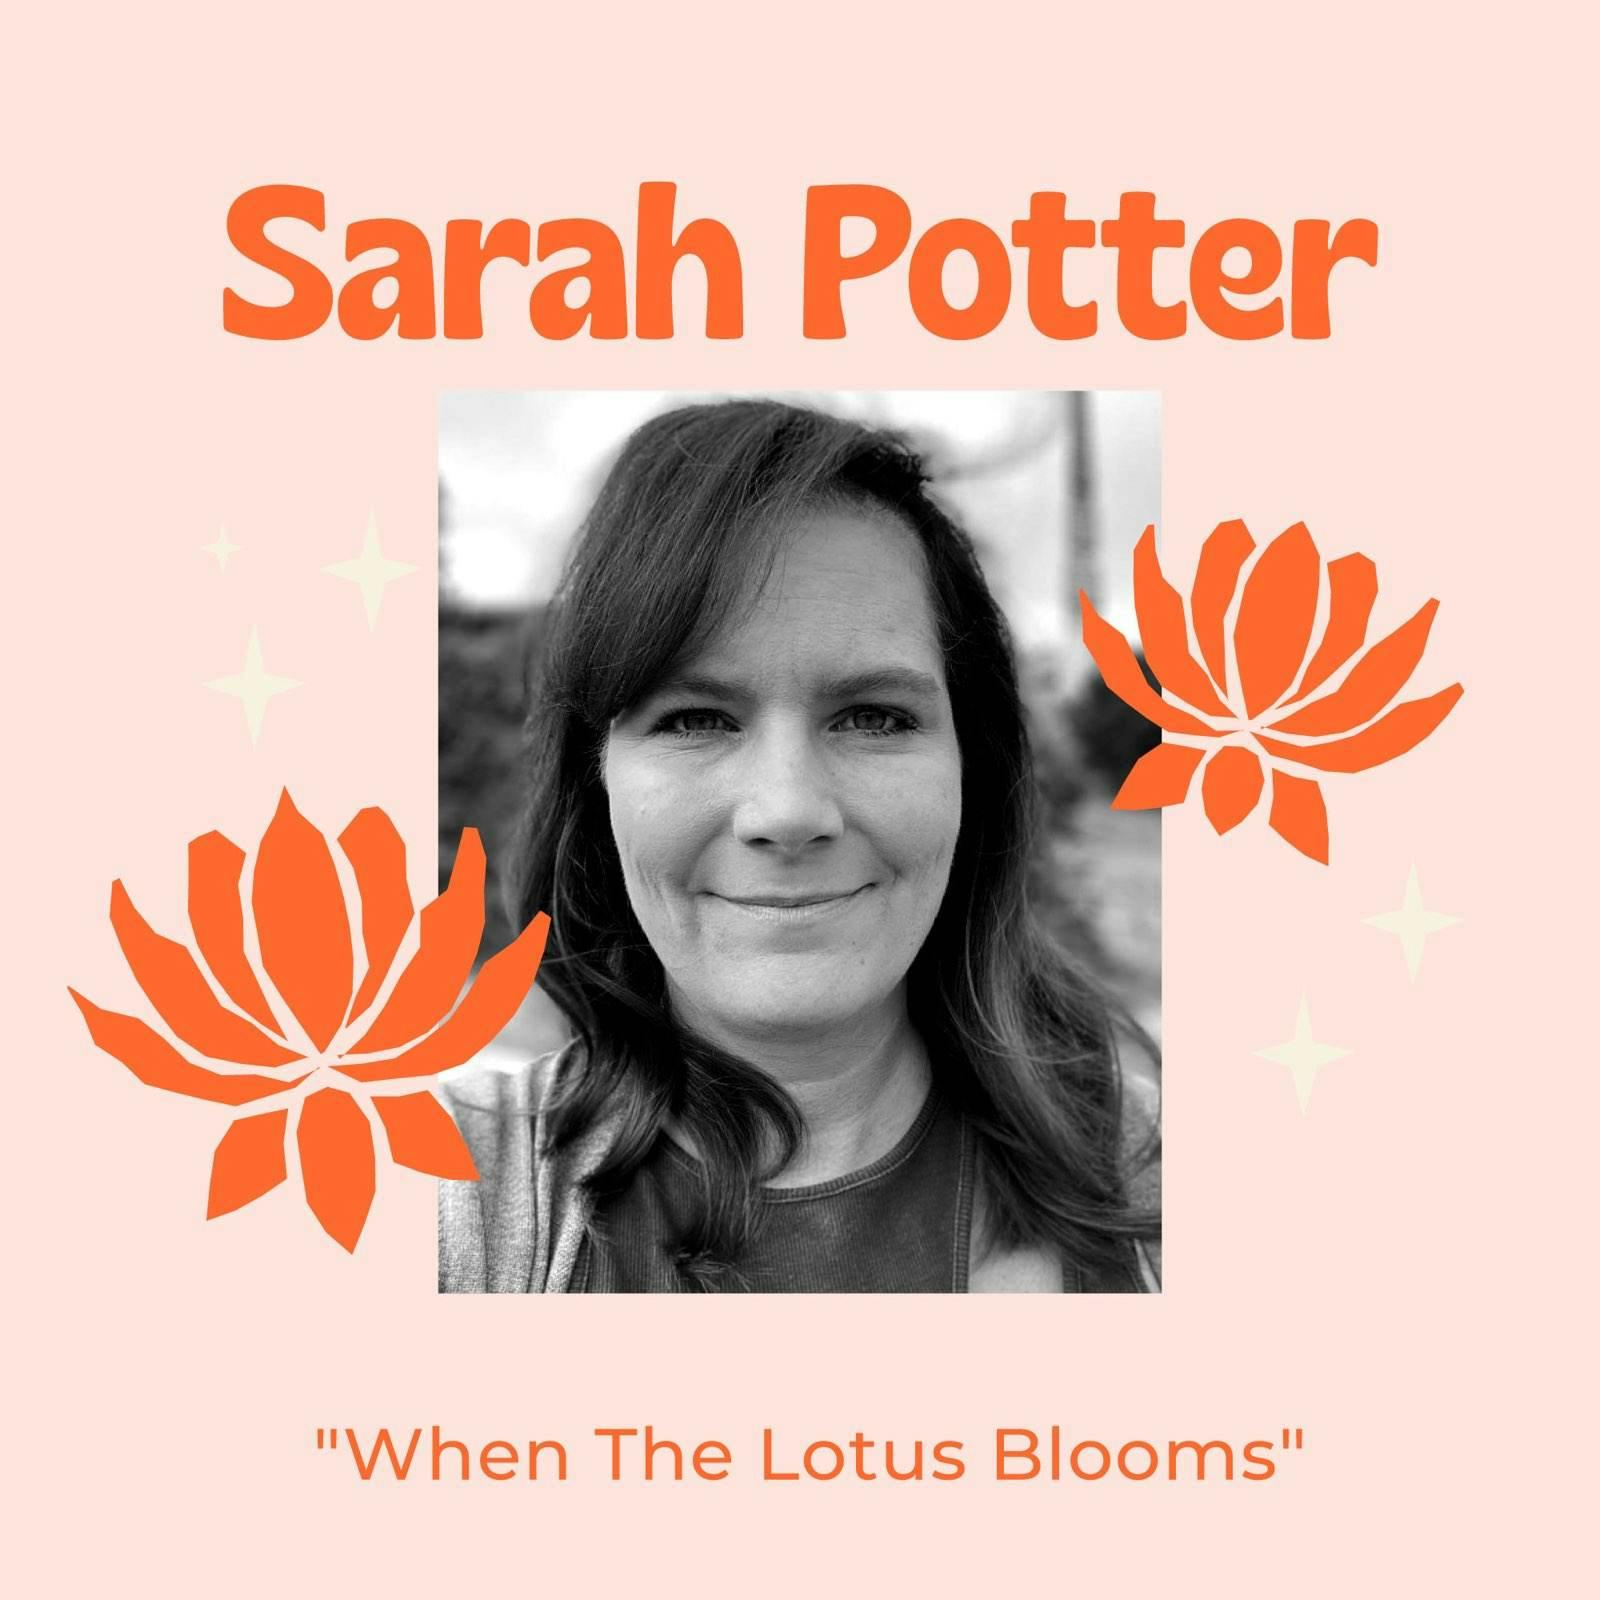 Honoring a Husbands Legacy by Finishing His Work on a Documentary About Rare Disease Acute Flaccid Myelitis and Her Own Grief Along the Way with Sarah Potter